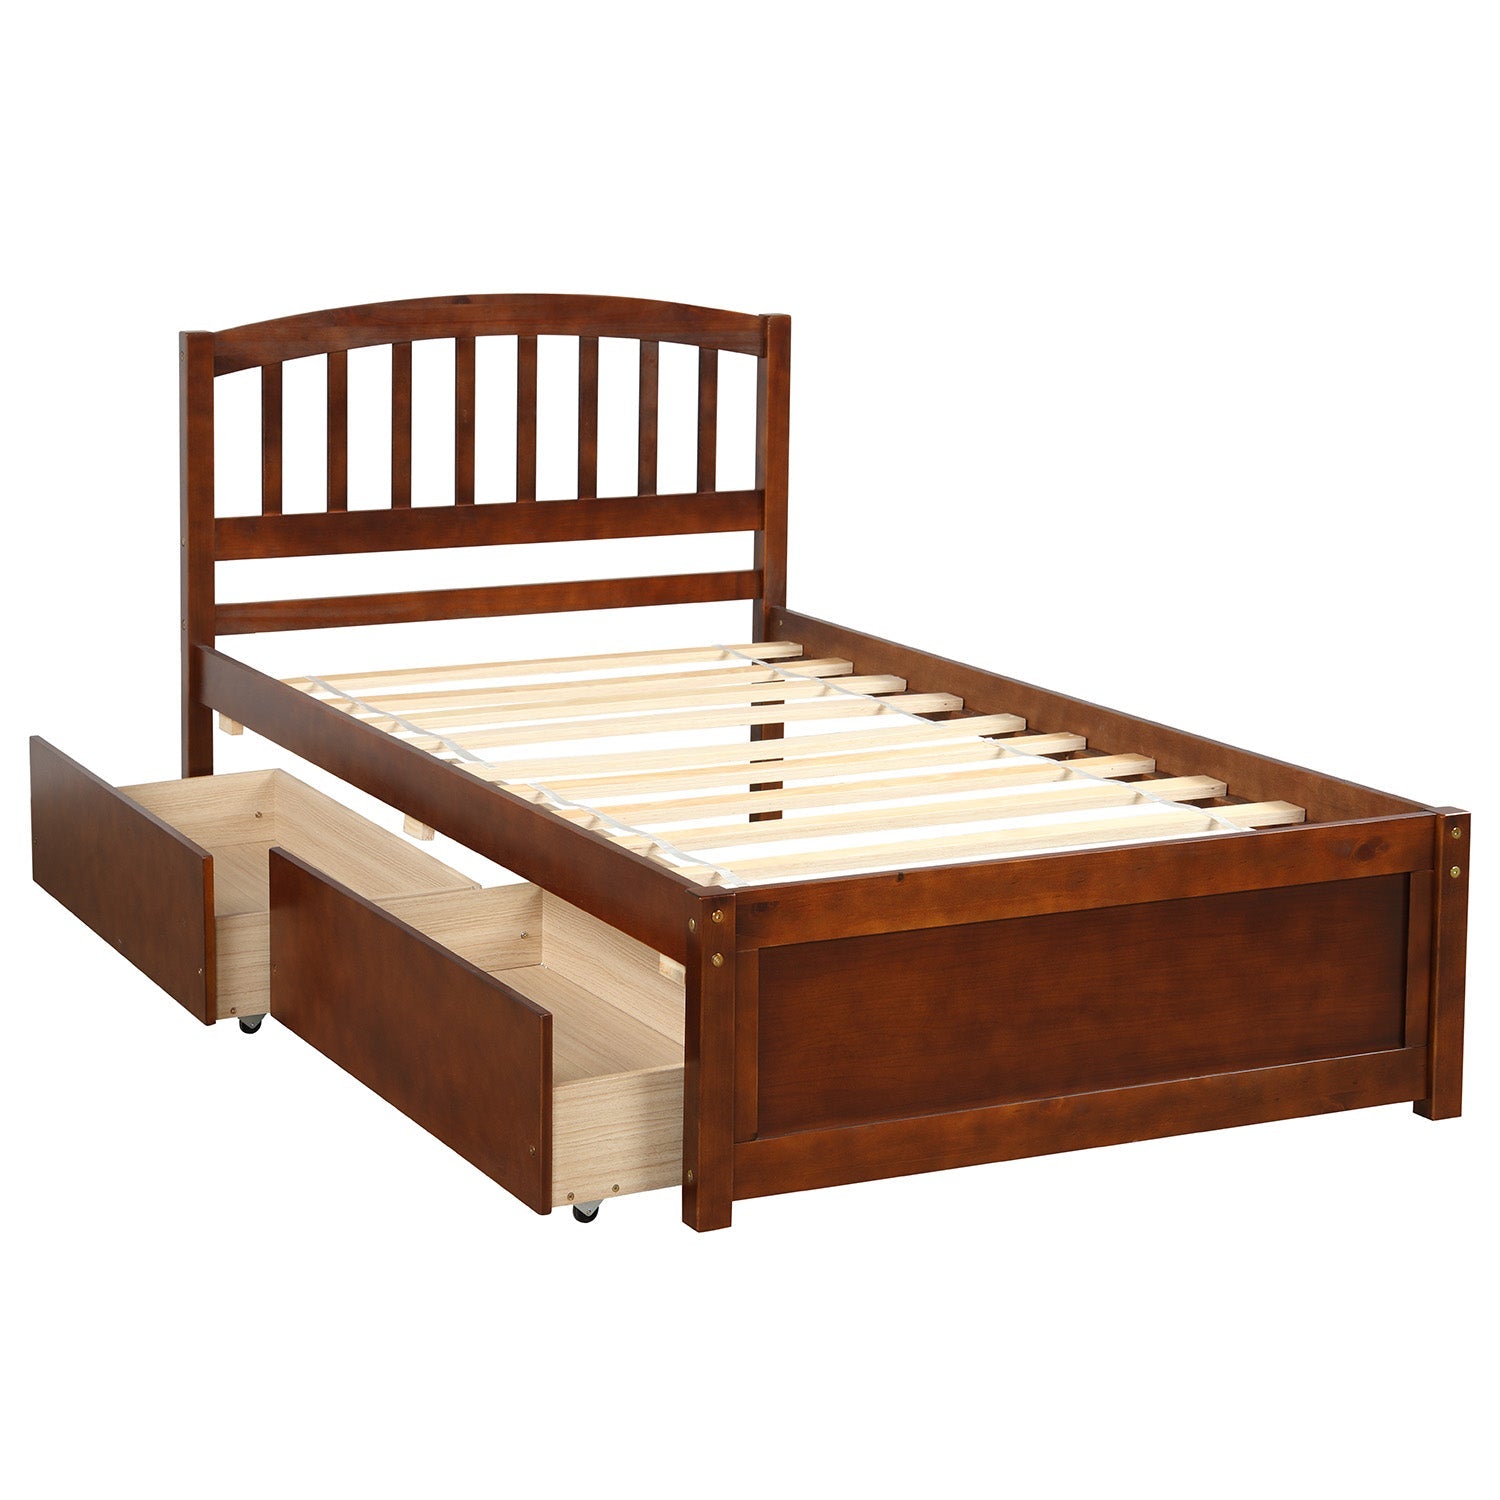 Twin Platform Bed Frame with Storage Drawers, Kids Twin Size Bed Frame No Box Spring Needed, Solid Wood Platform Beds with Headboard and Two Drawers, Modern Single Bed Bedroom Furniture, Walnut, J1169